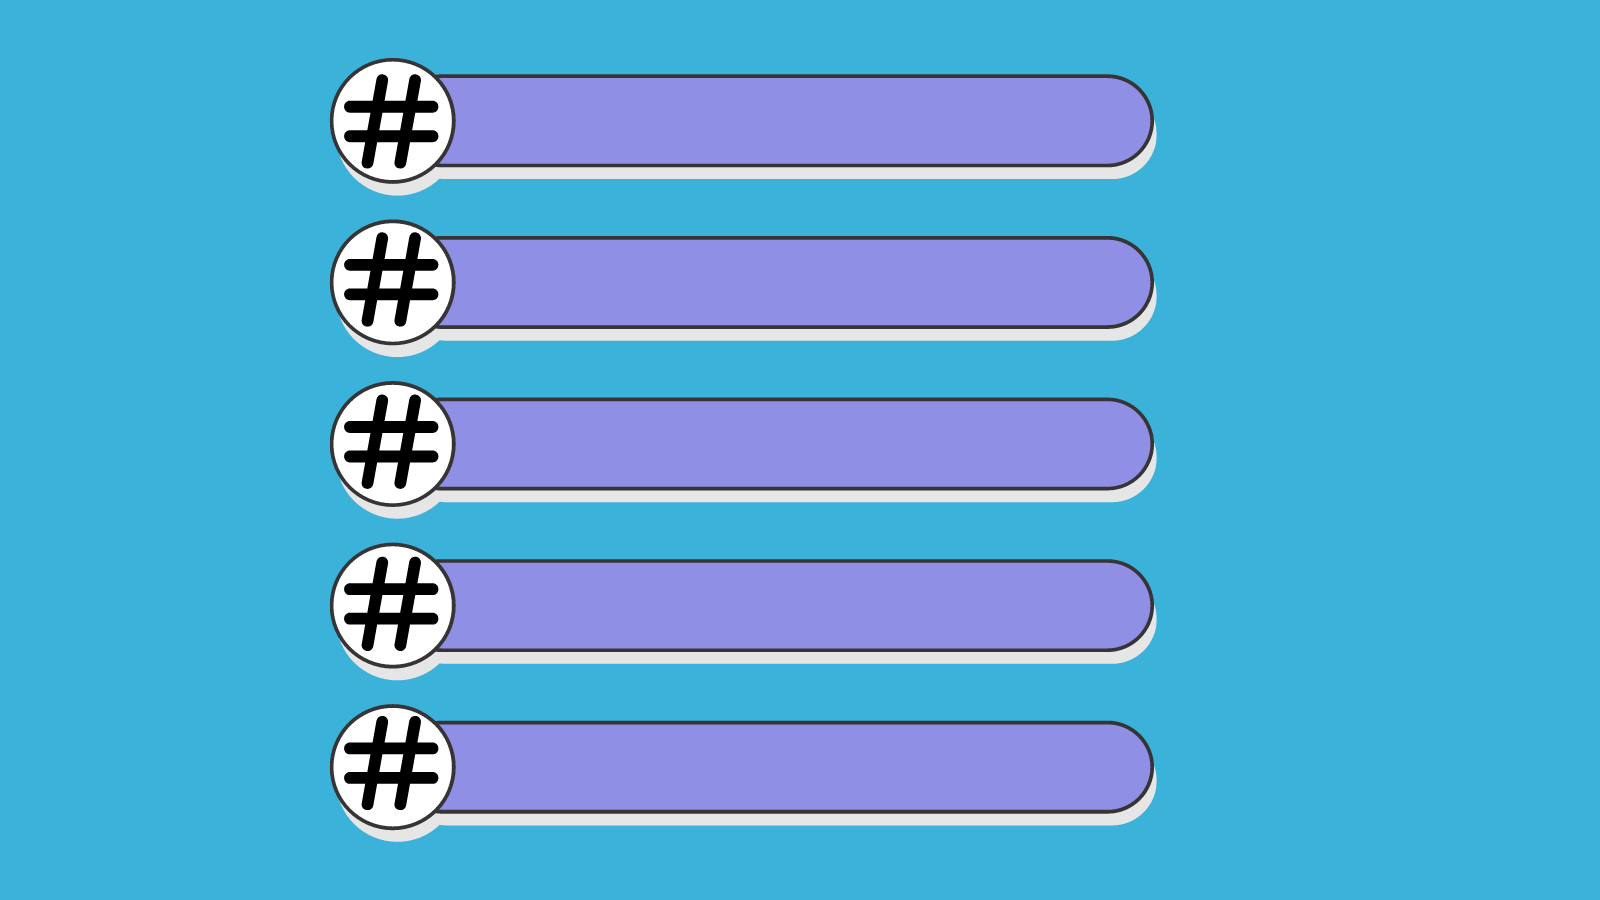 A blank bullet point list with hashtags in the bullet circles